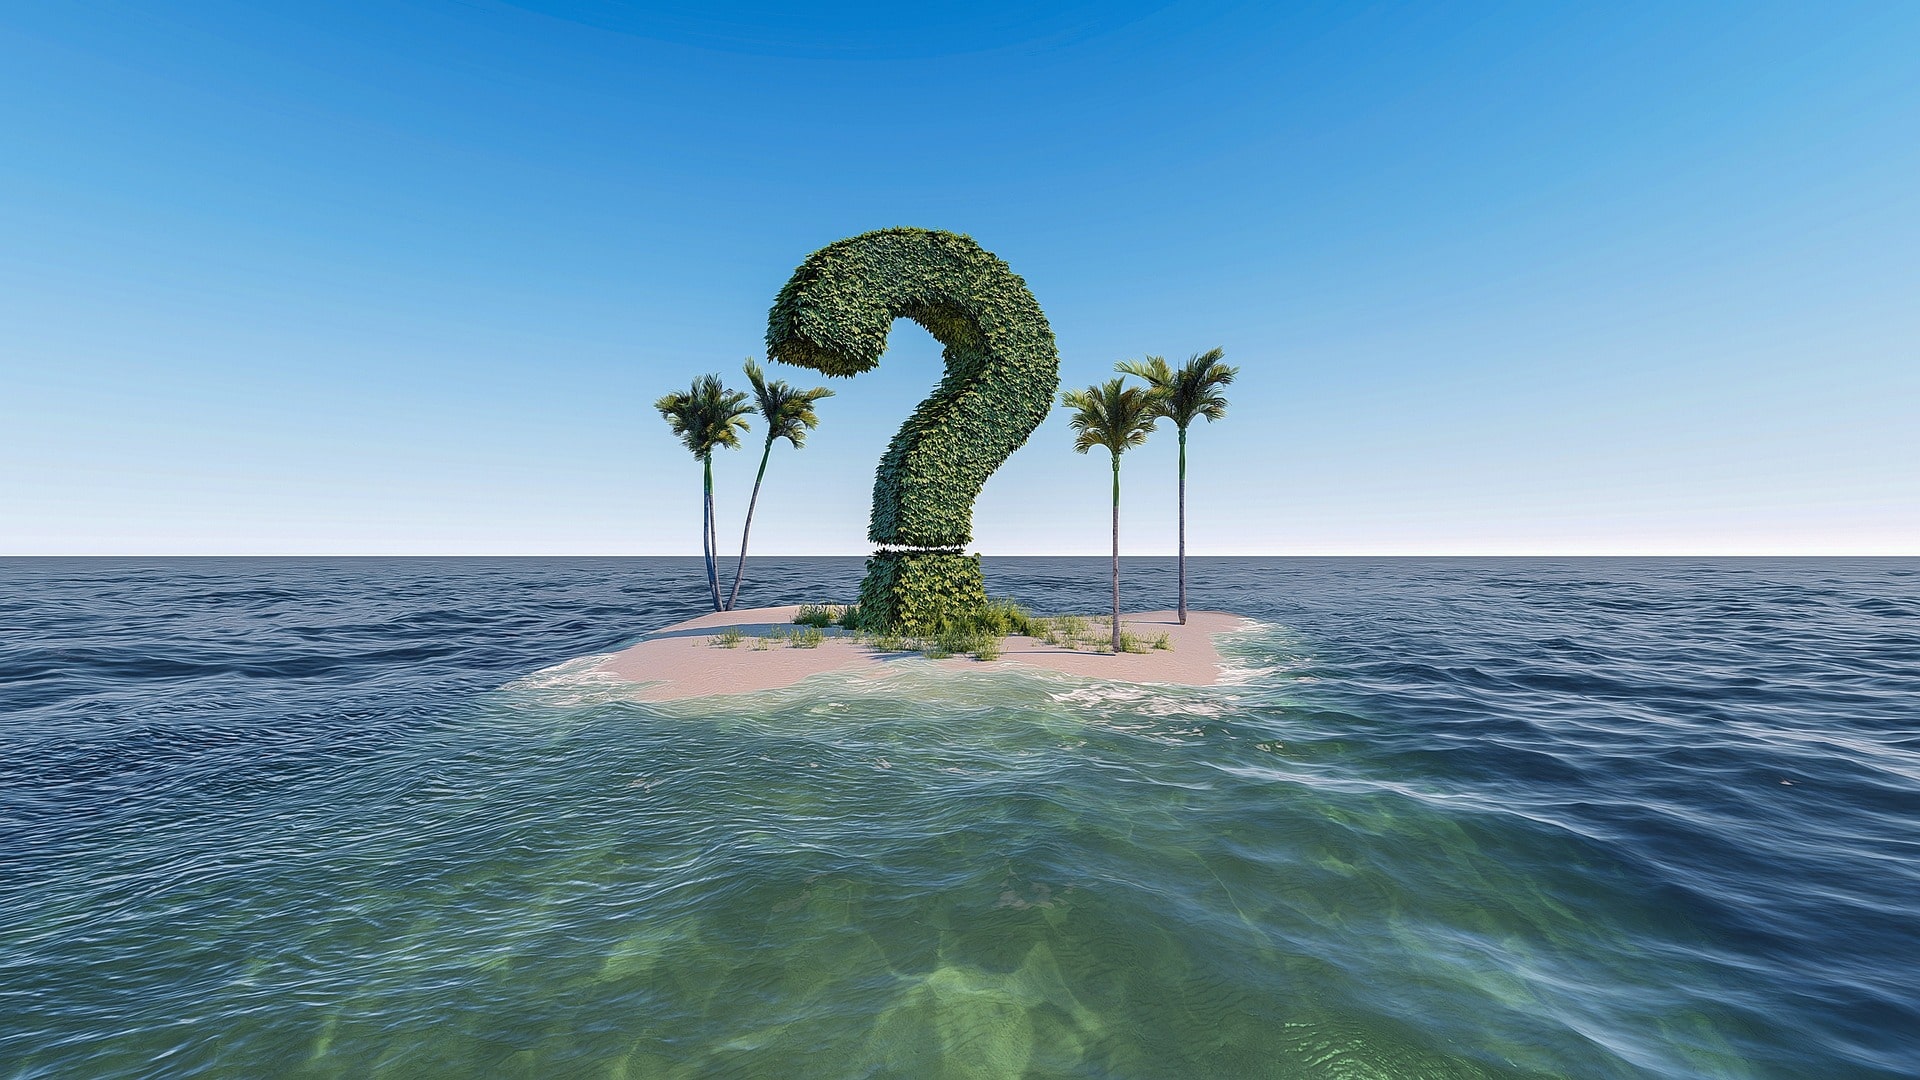 Tree in shape of a question mark on a desert island